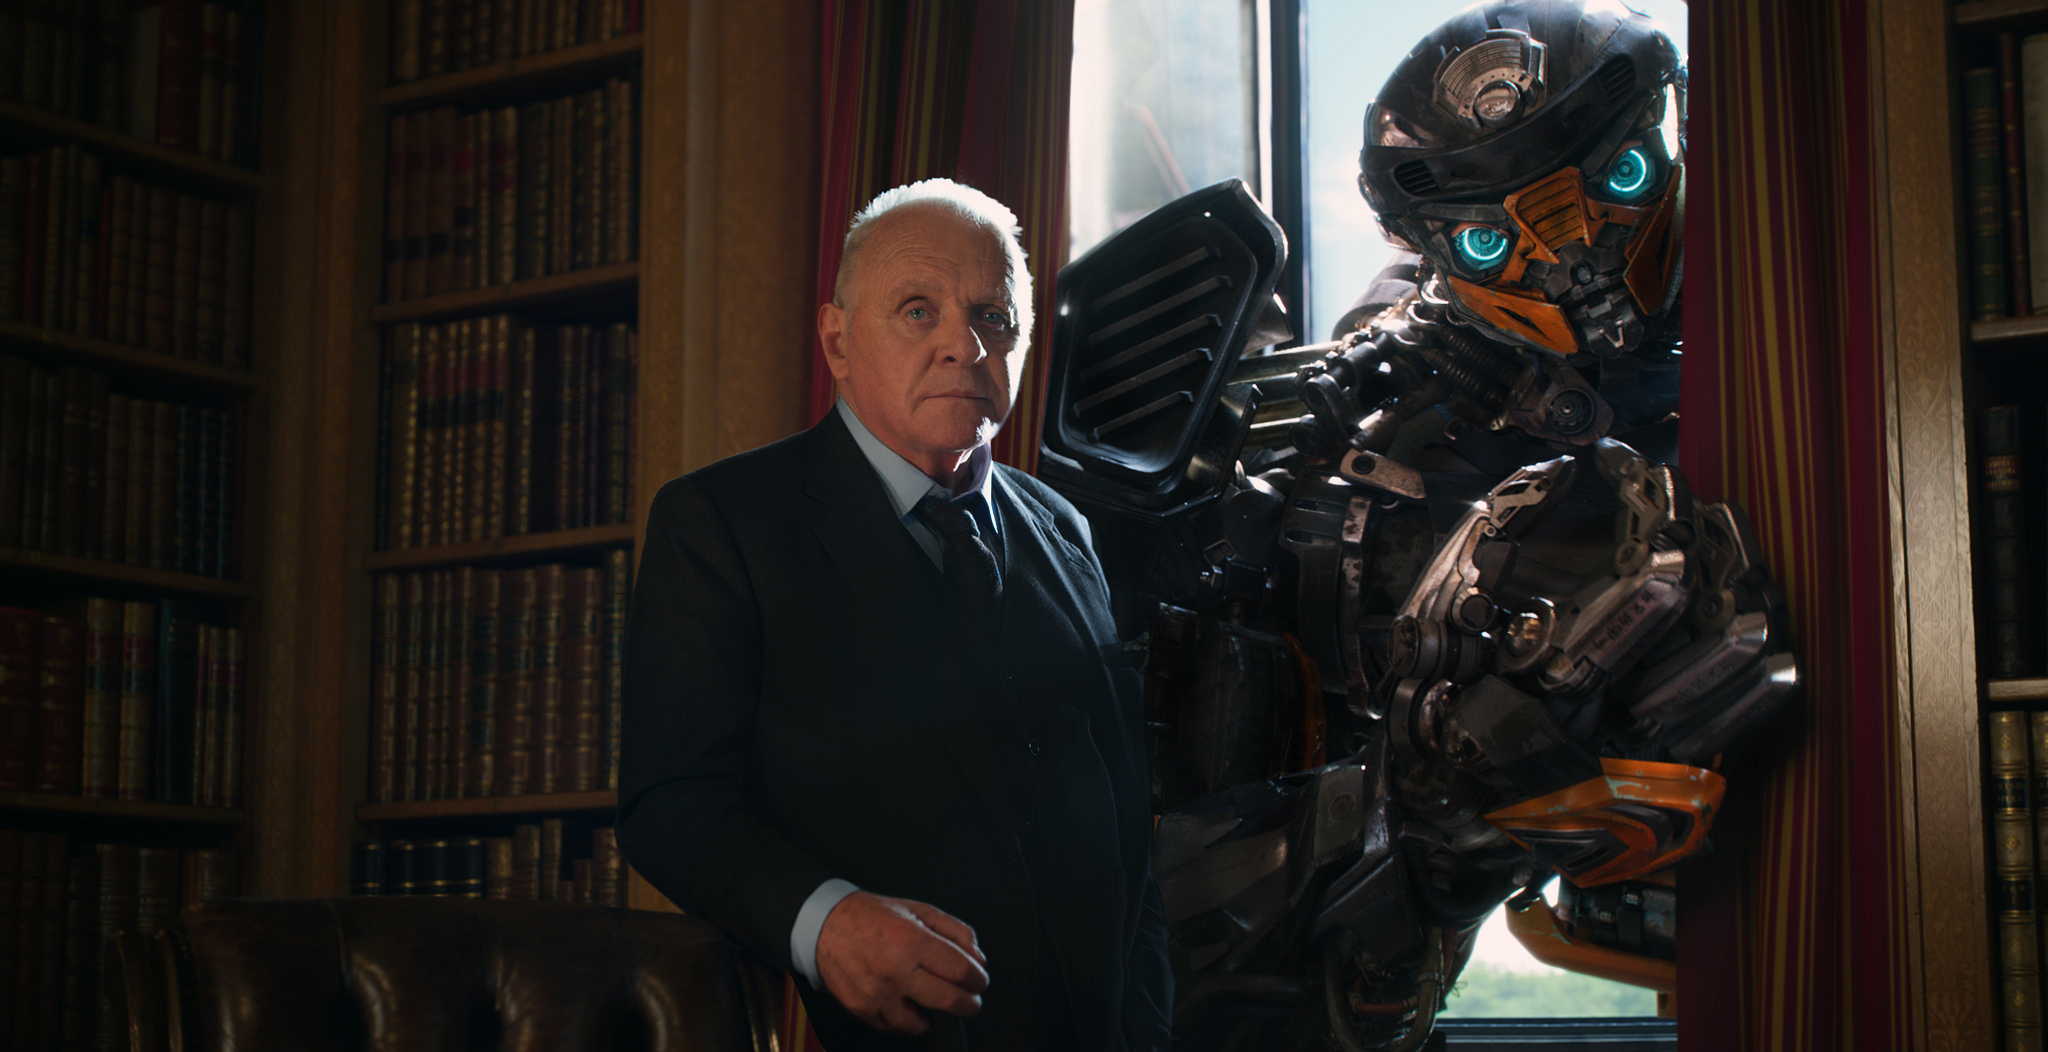 People 2048x1052 transformers: the last knight Anthony Hopkins Transformers actor movies film stills